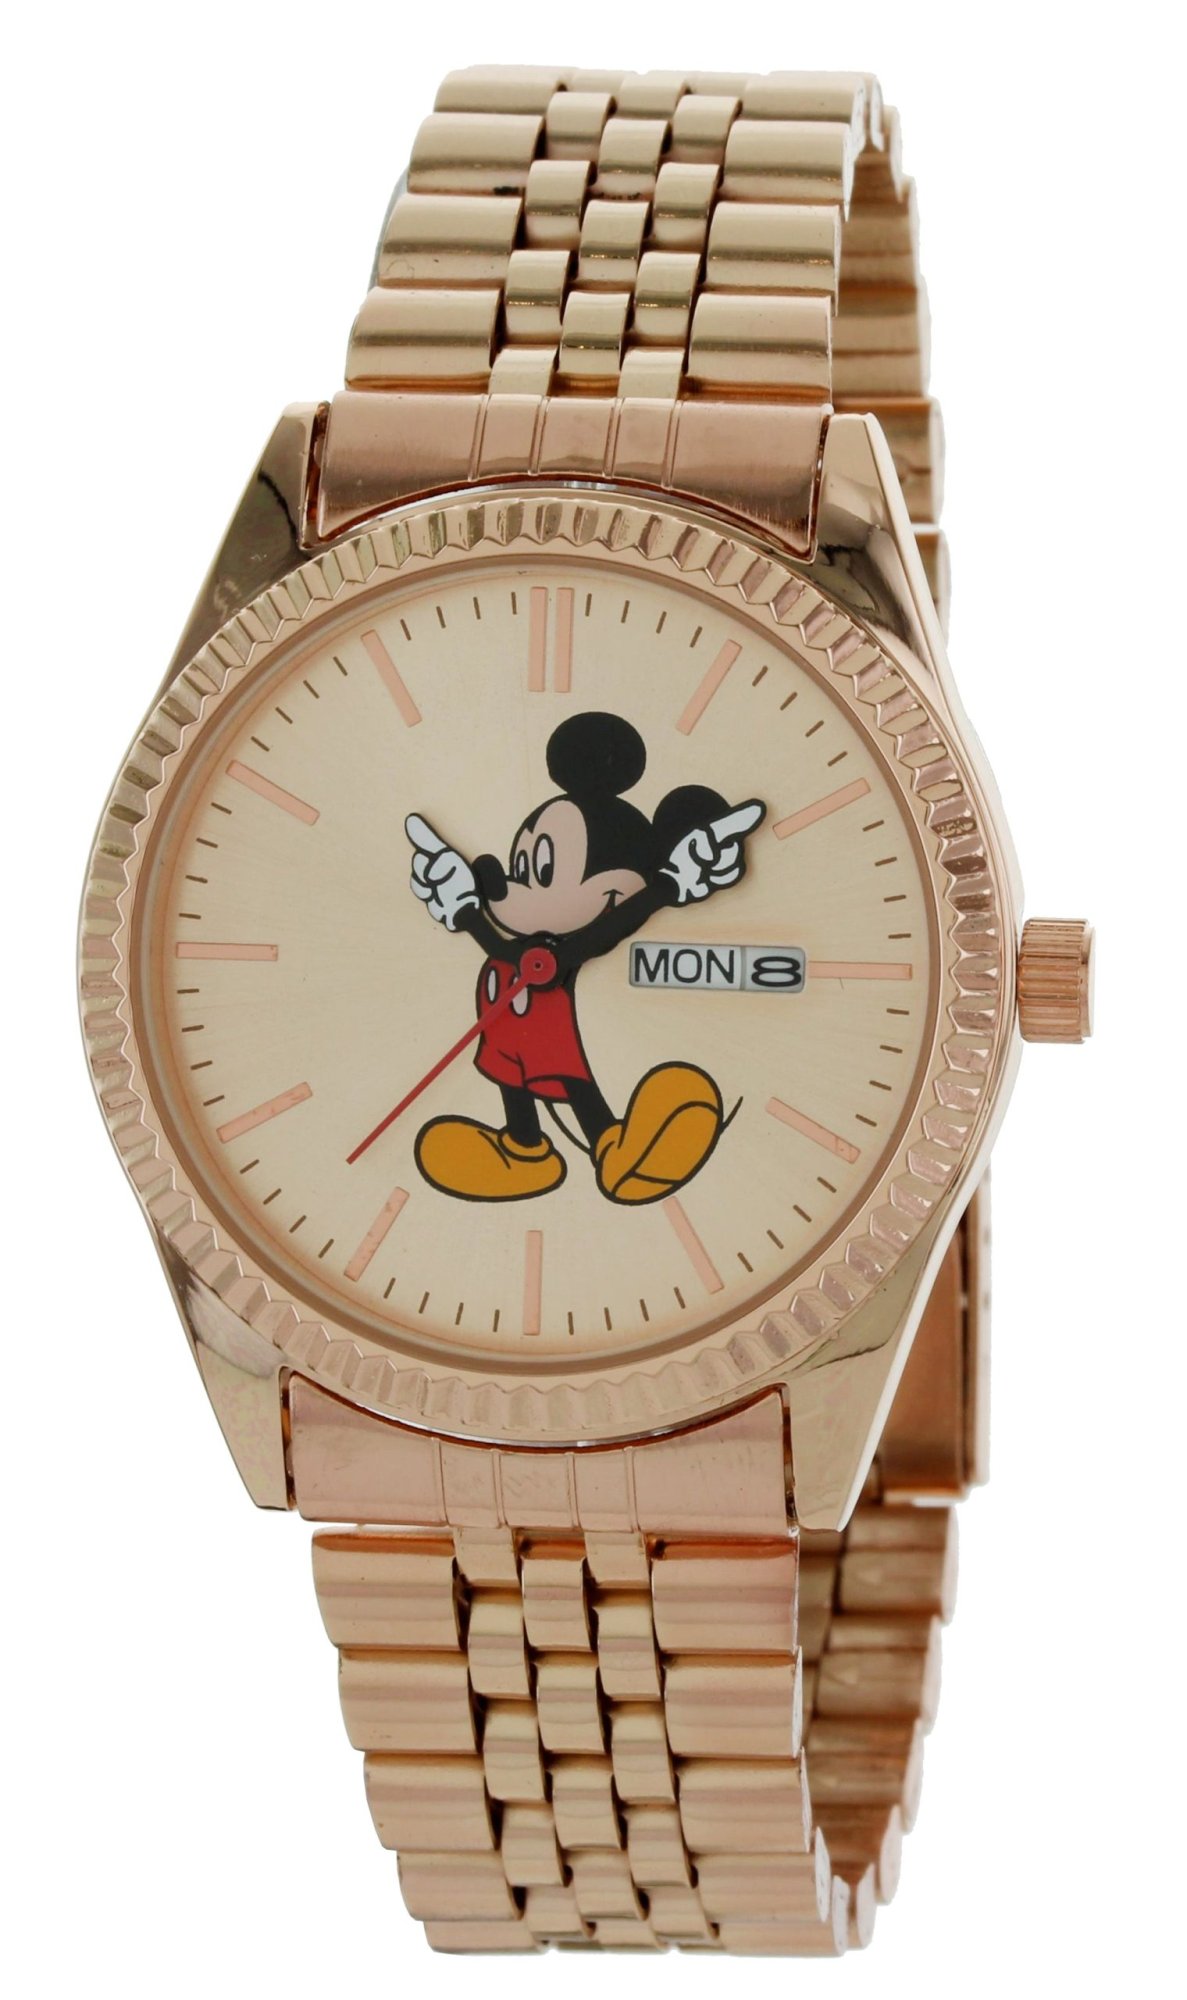 Model: Men's Mickey Mouse Watch in Rose Gold with Day and Date